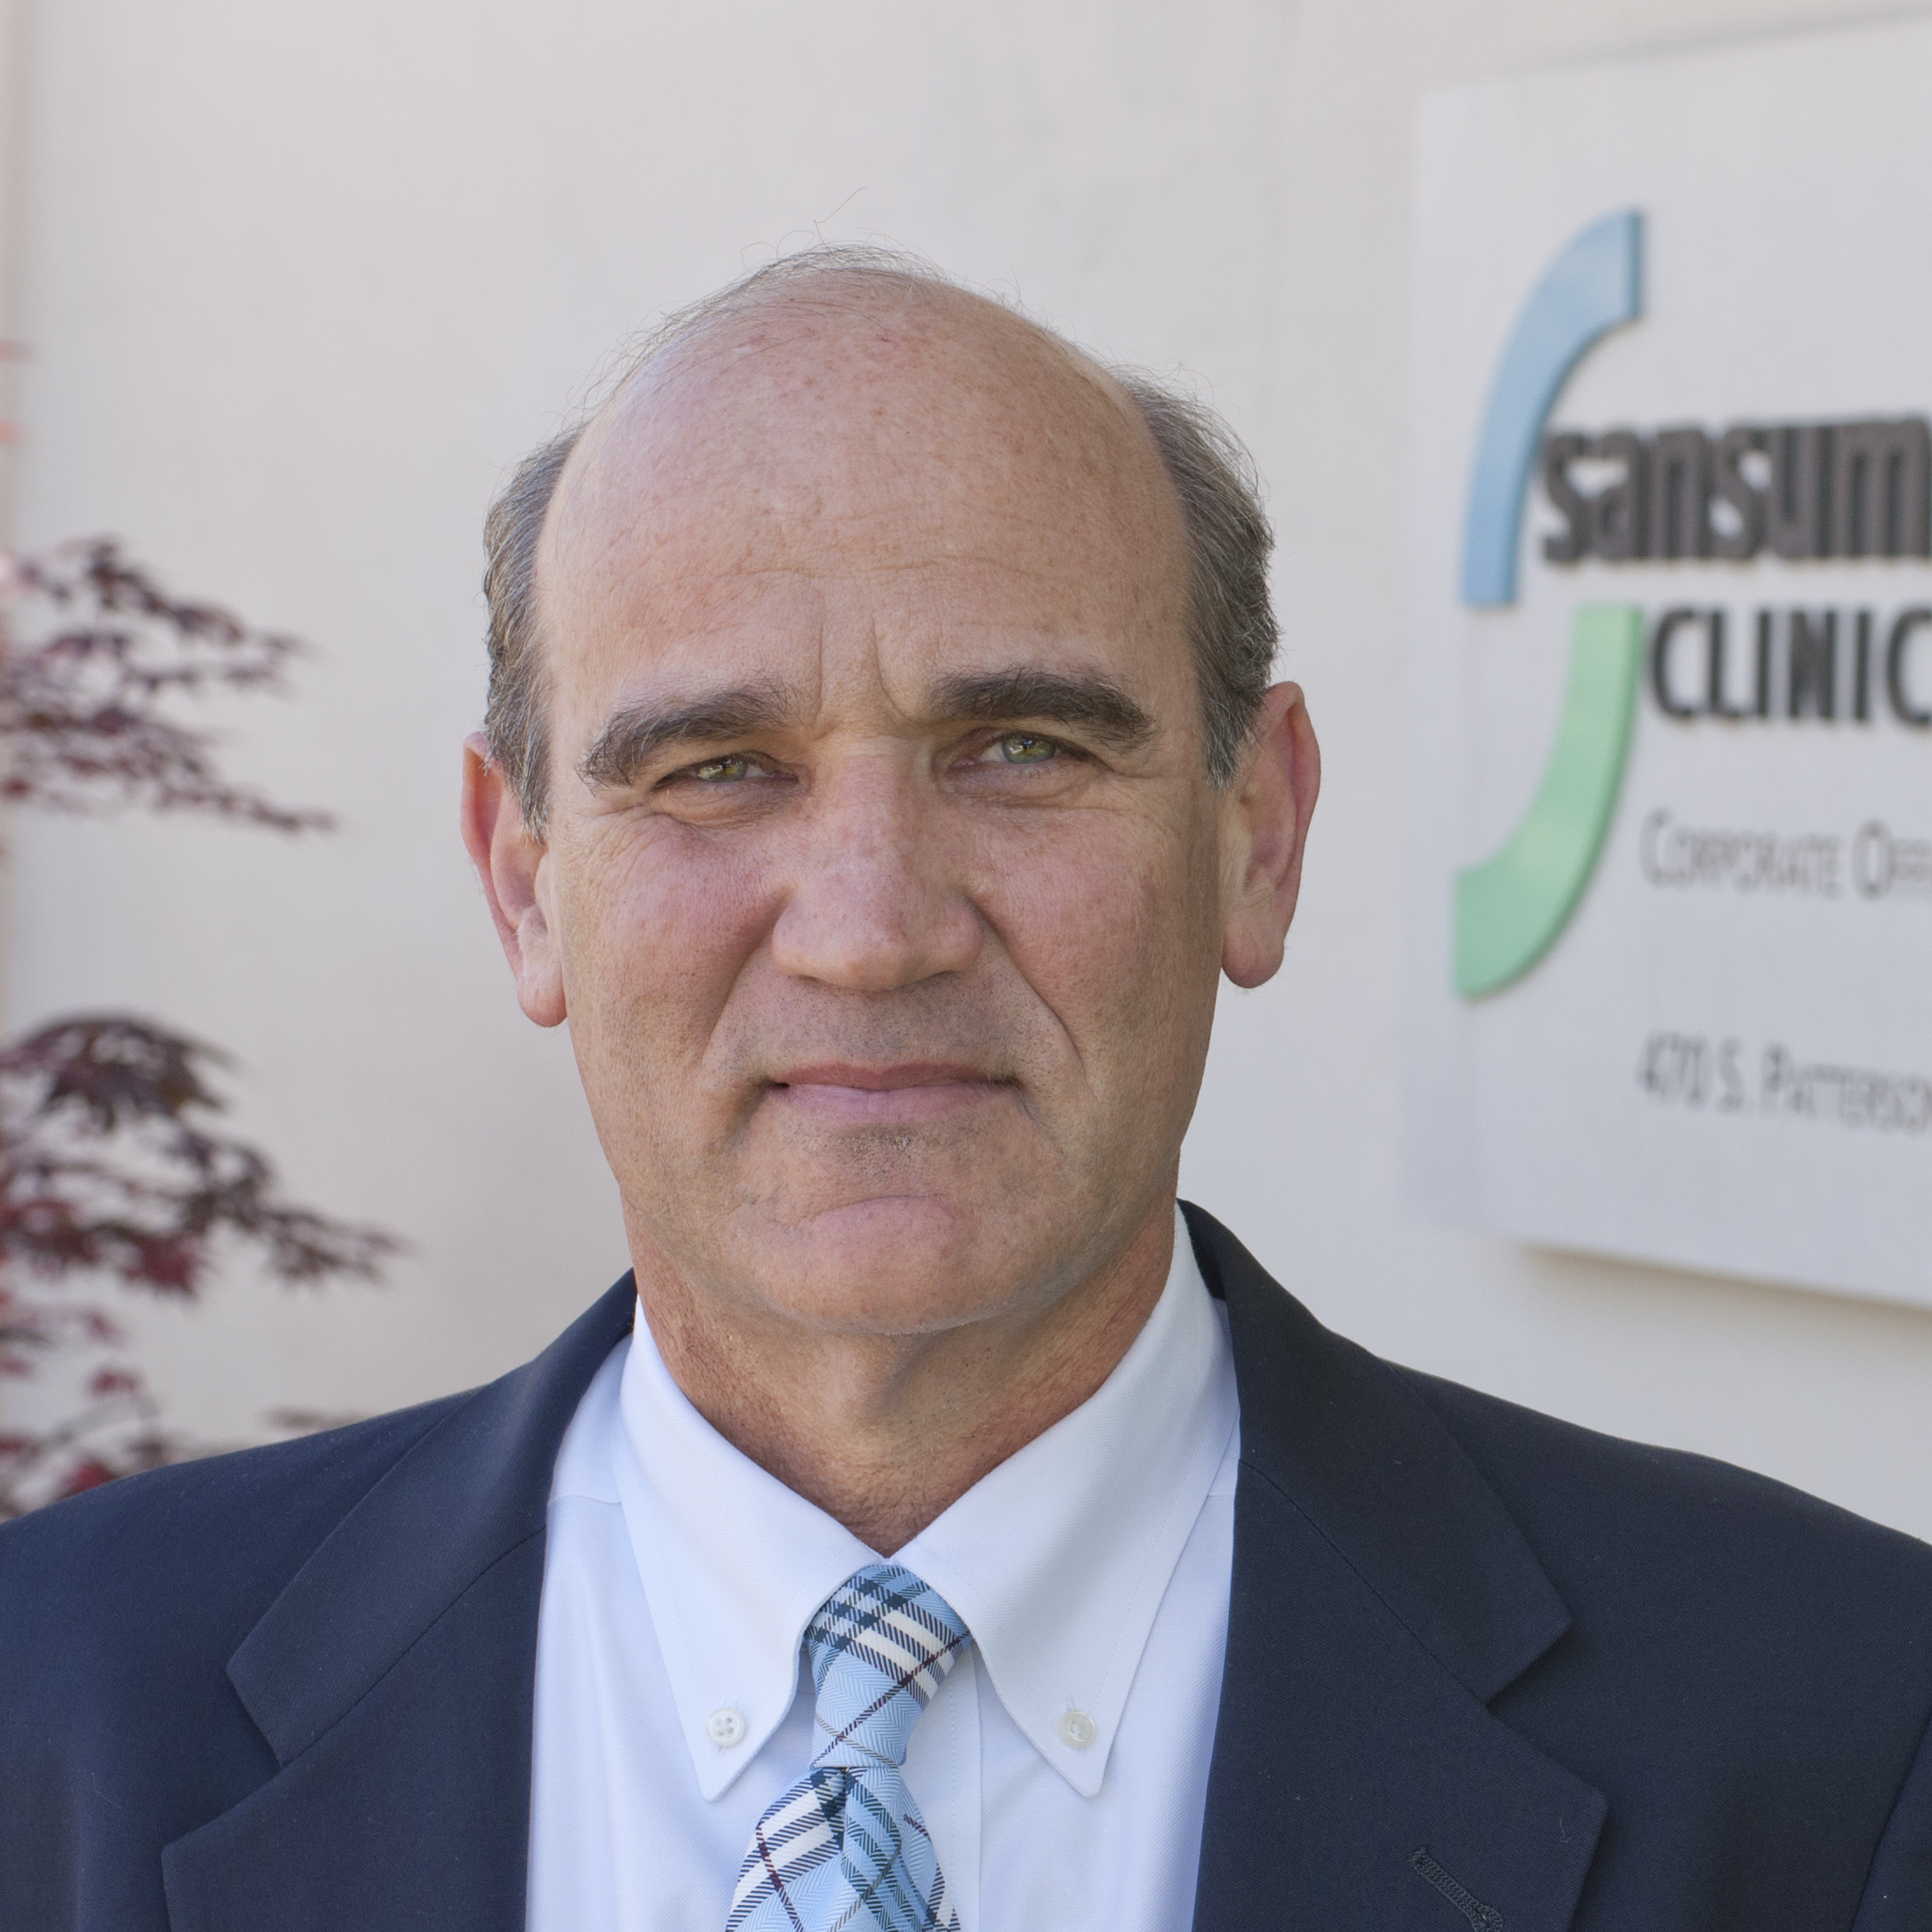 Dr. Kurt Ransohoff,CEO and Chief Medical Officer, Sansum Clinic